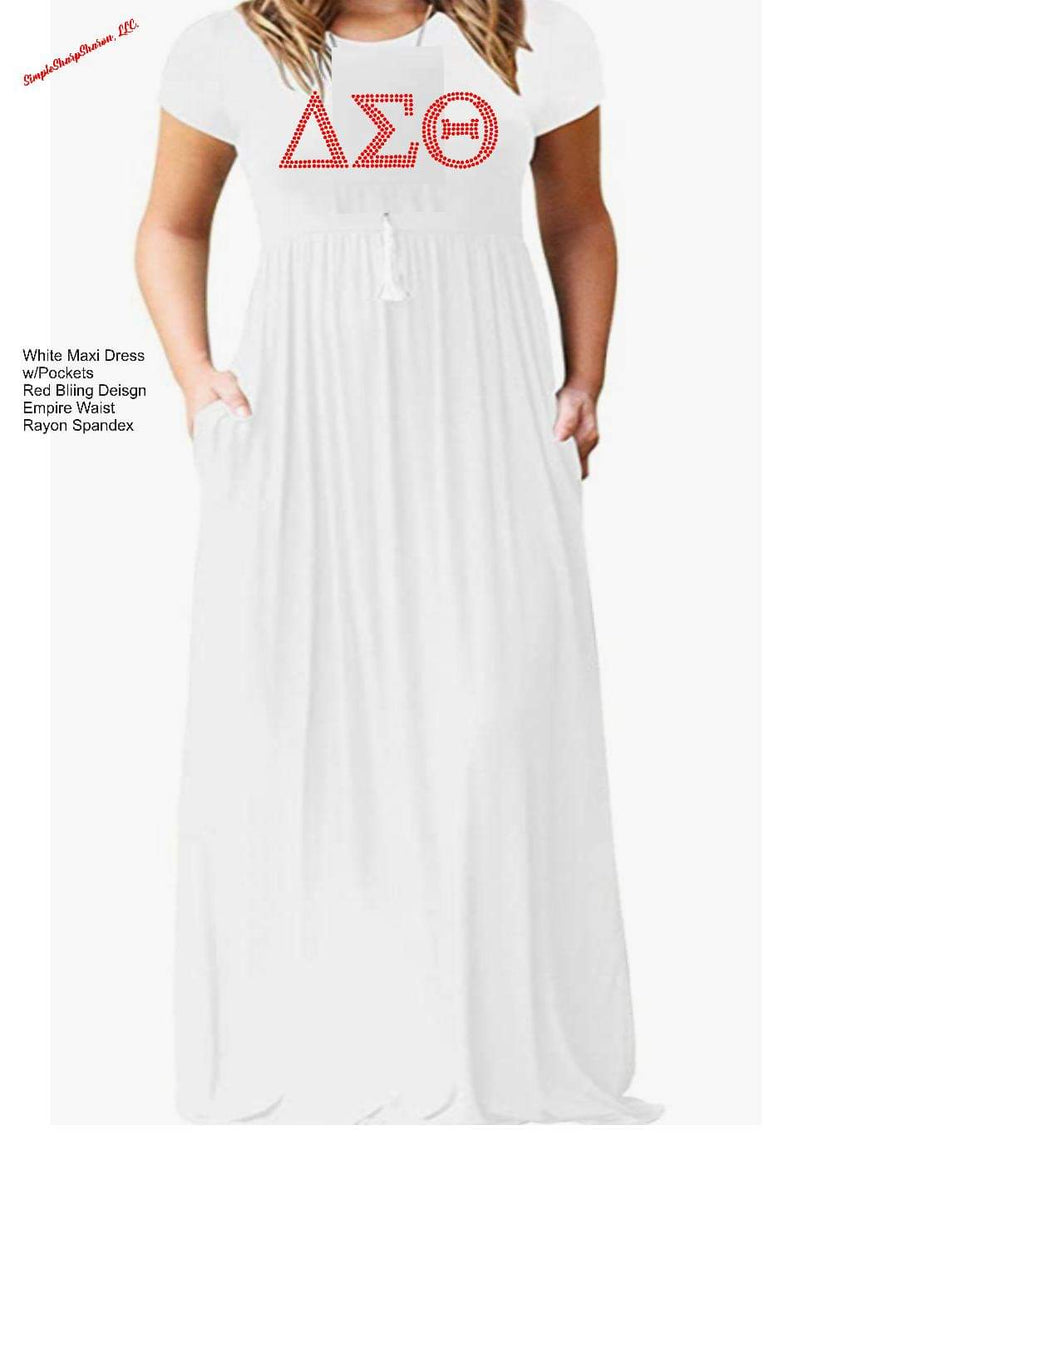 White Maxi Dress with Red DST Bling